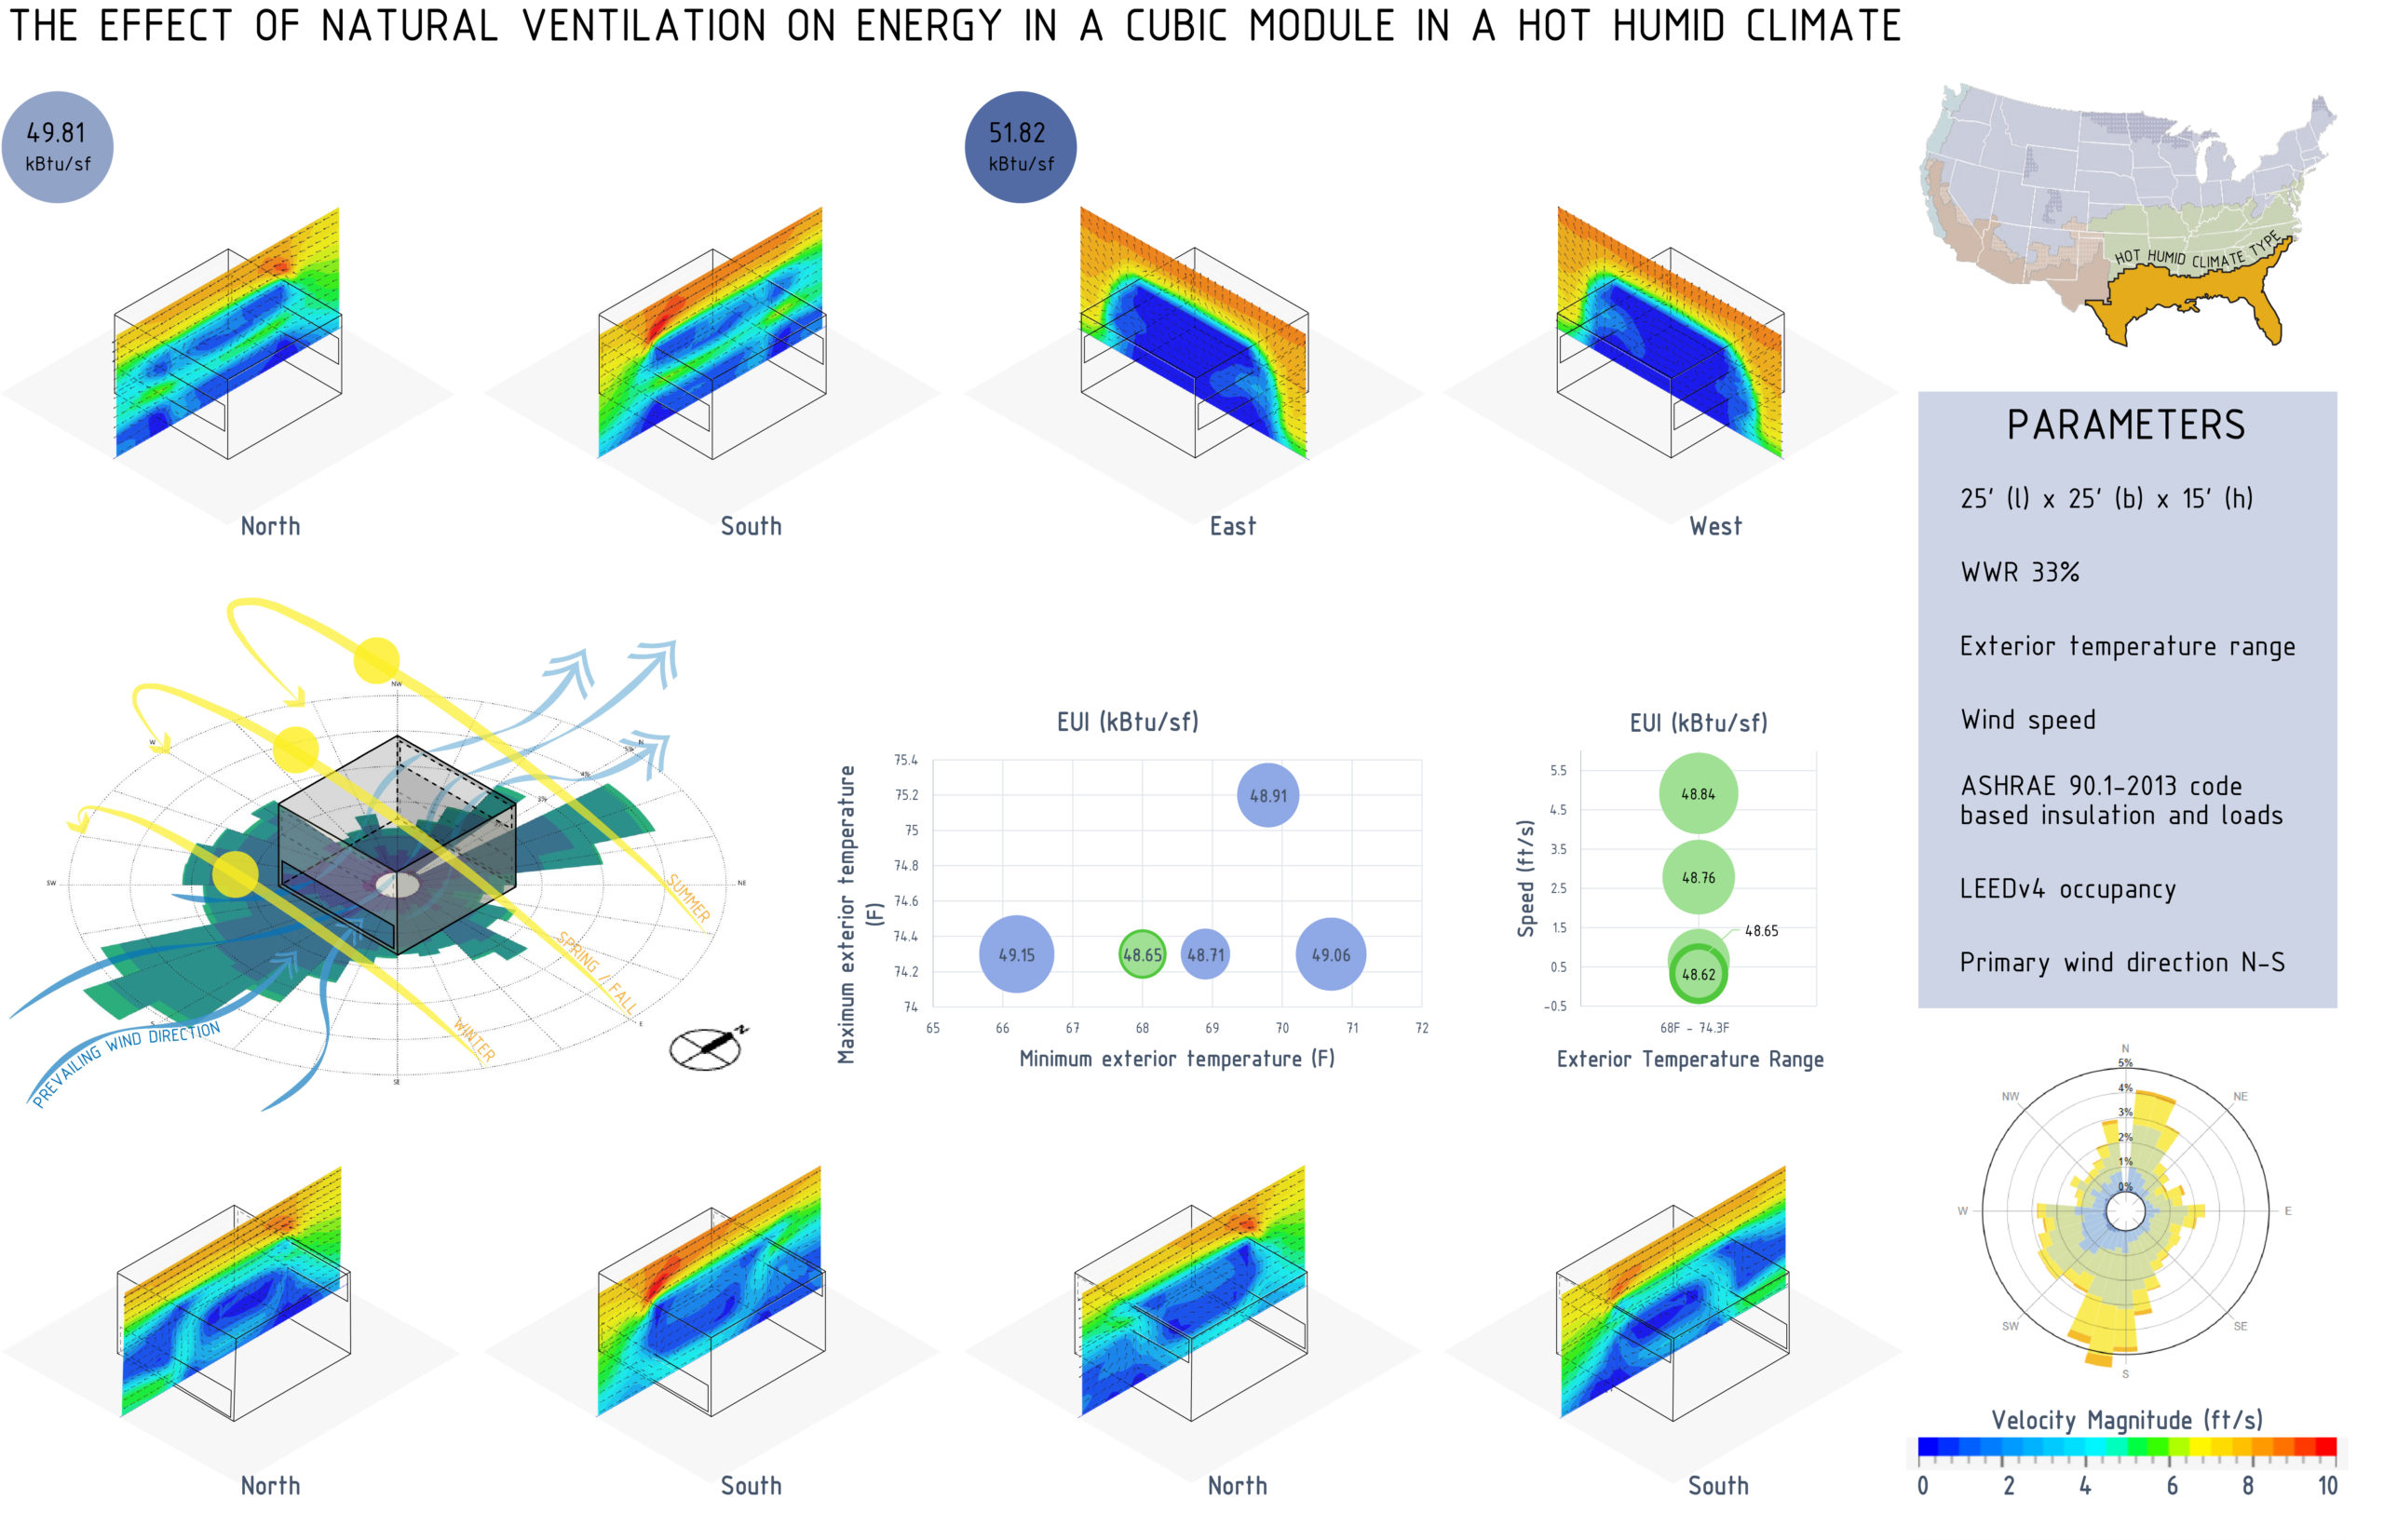 What is the impact of natural ventilation on energy efficiency in a hot humid climate depending on orientation, wind direction, speed and placement of opening?